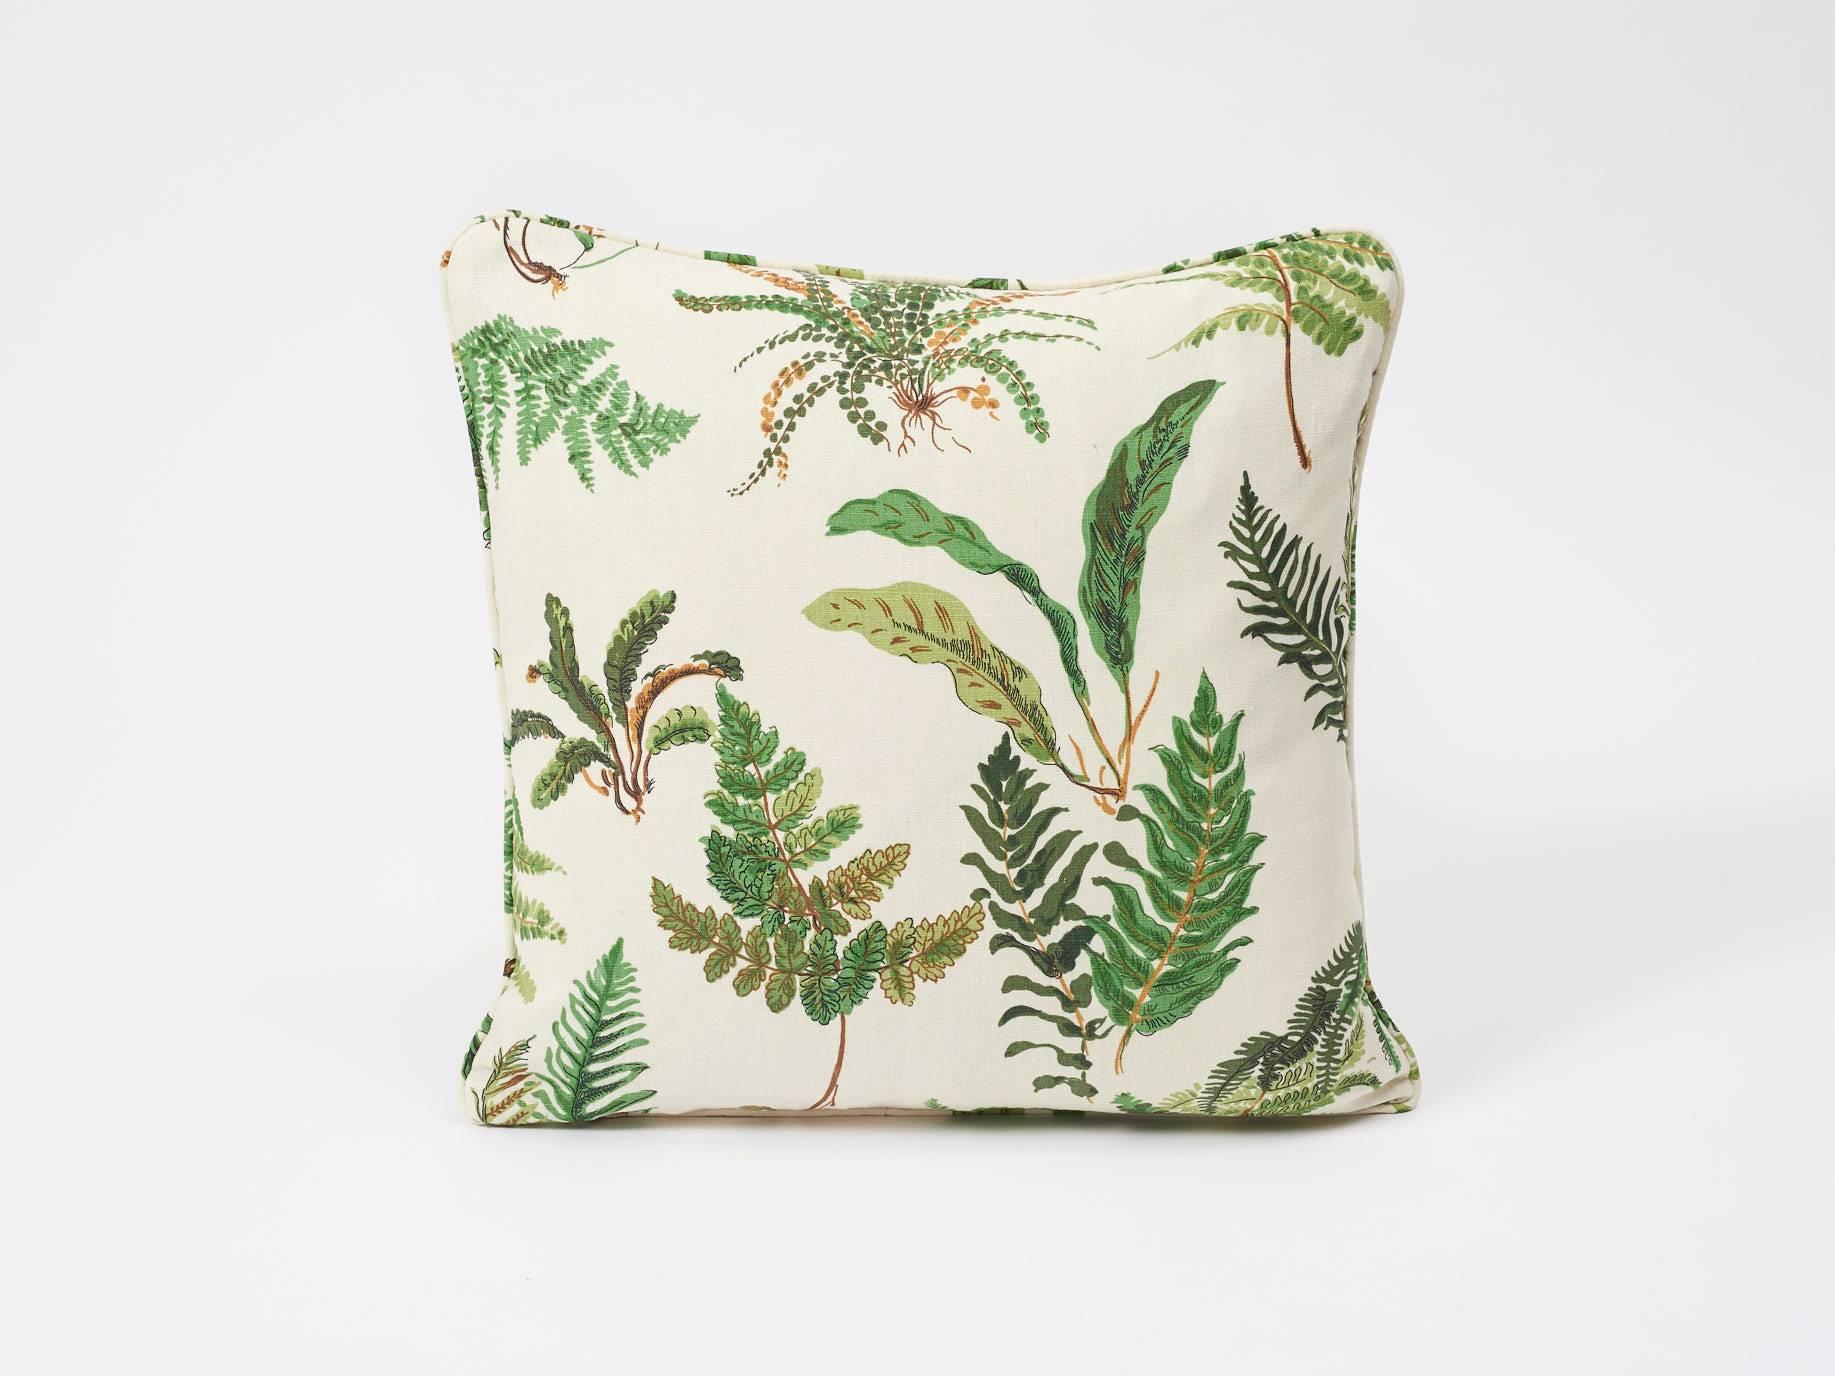 The leafy all-over ferns make this a stylish twist on classic botanical patterns. Sourced from an Elsie de Wolfe-era hand-blocked cotton in our Schumacher archives, this decor accessory is sure to elevate any interior or setting!    

*If out of